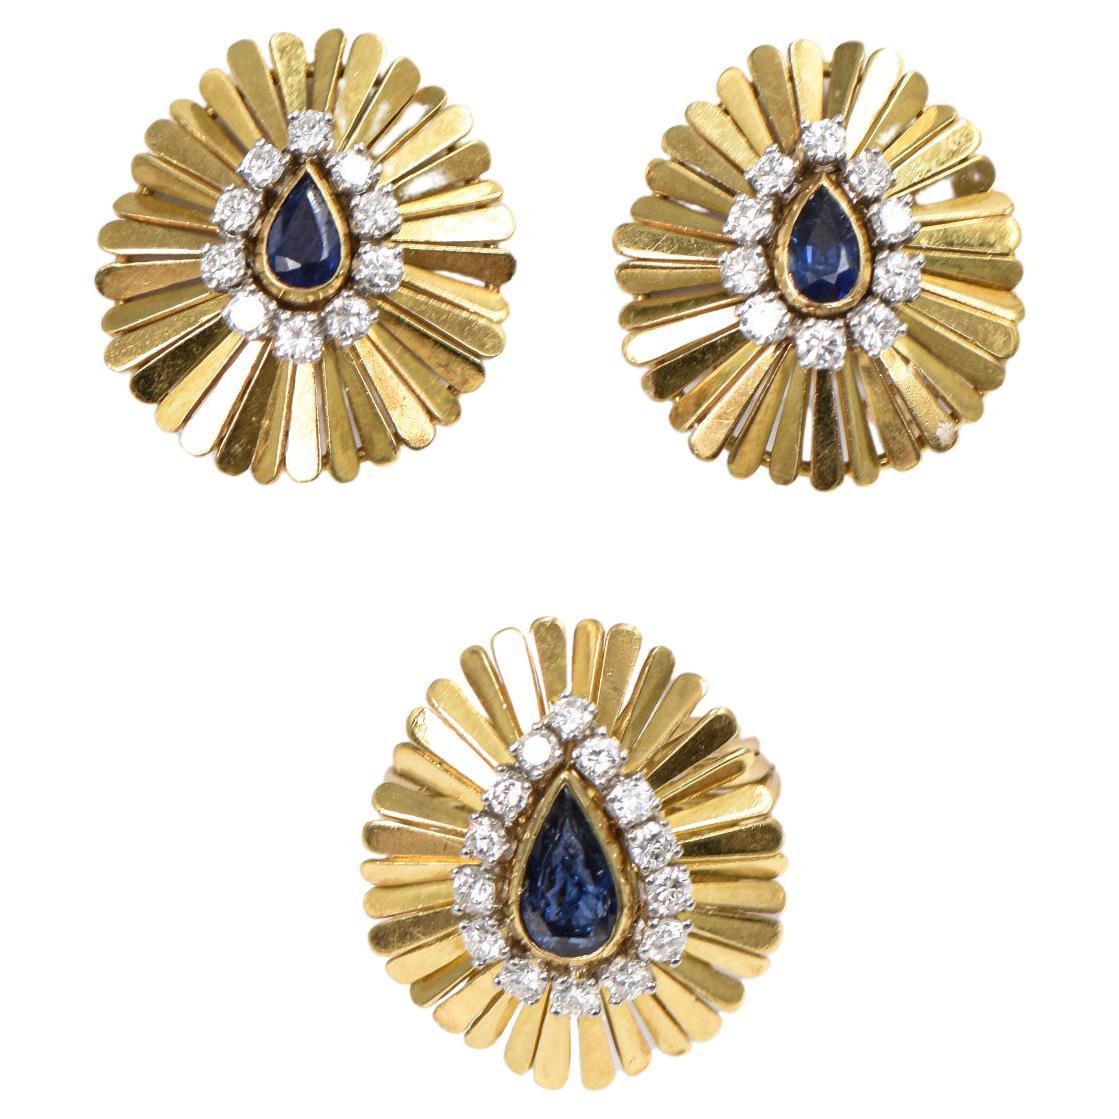 1950s Sapphire Diamond Ruffled Yellow Gold Clip Earrings and Cocktail Ring Set